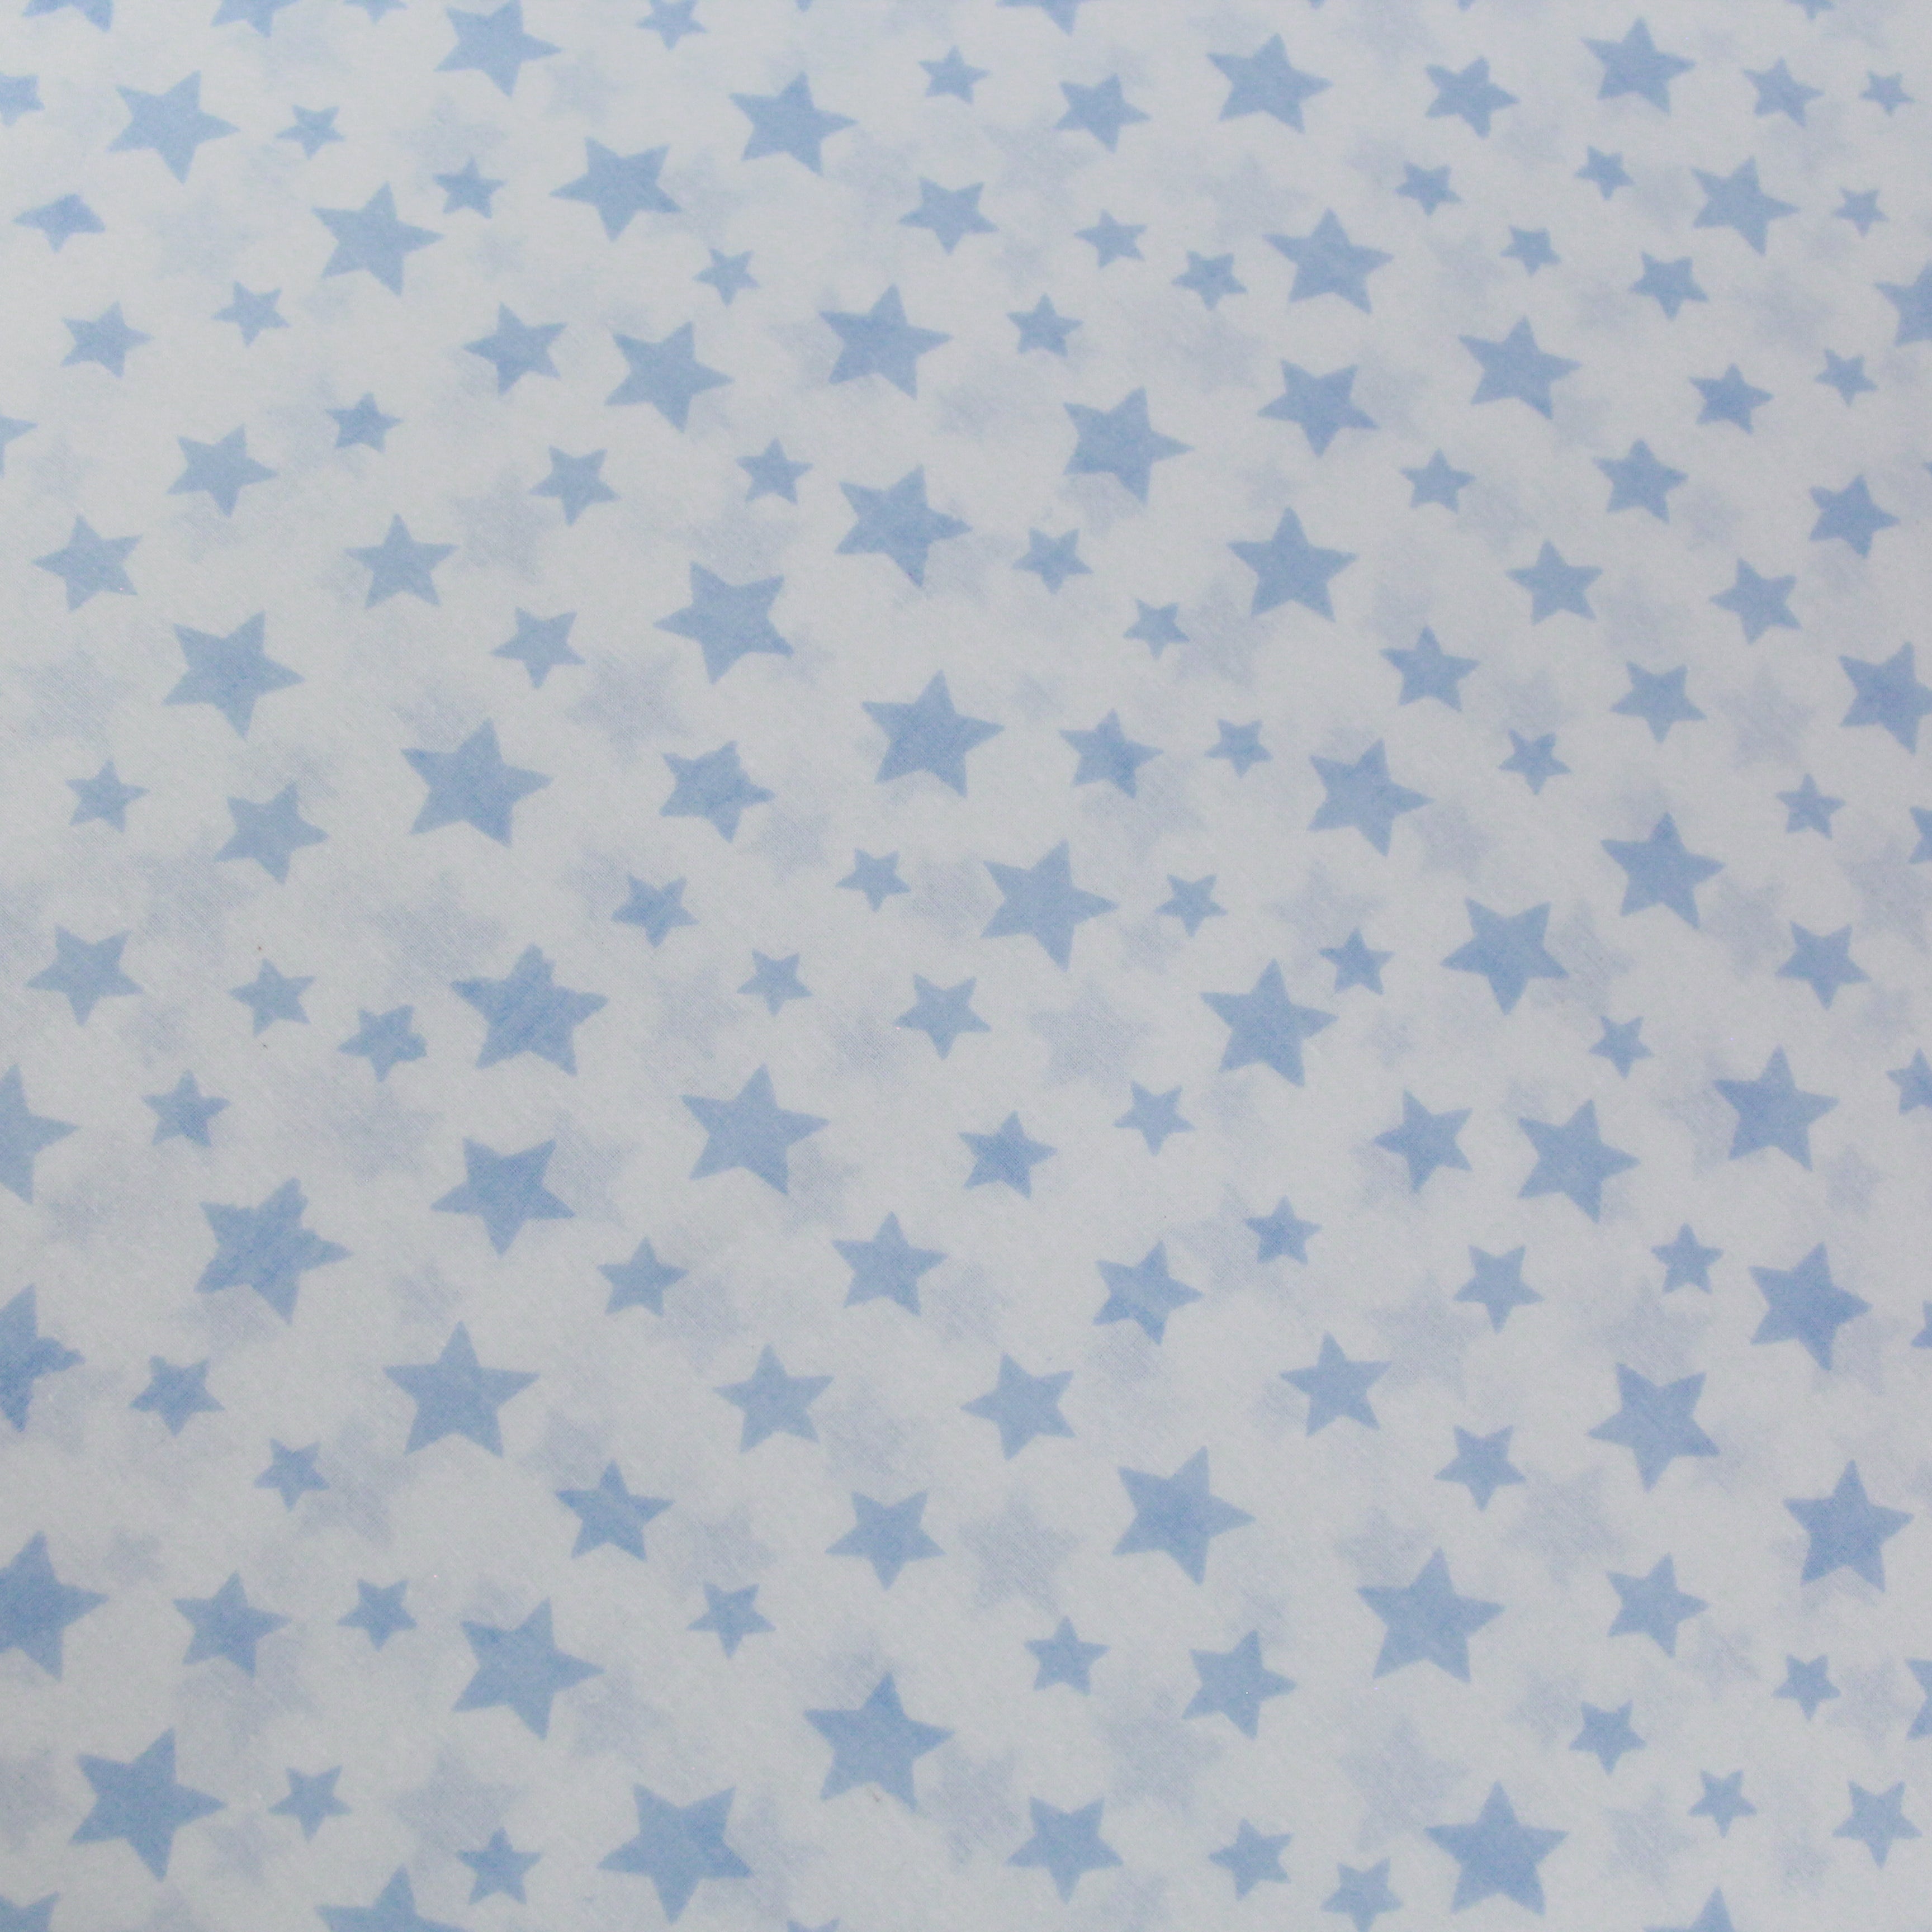 Premium Quality Super Wide Cotton Blend Sheeting "Blue Stars" 94" Wide White